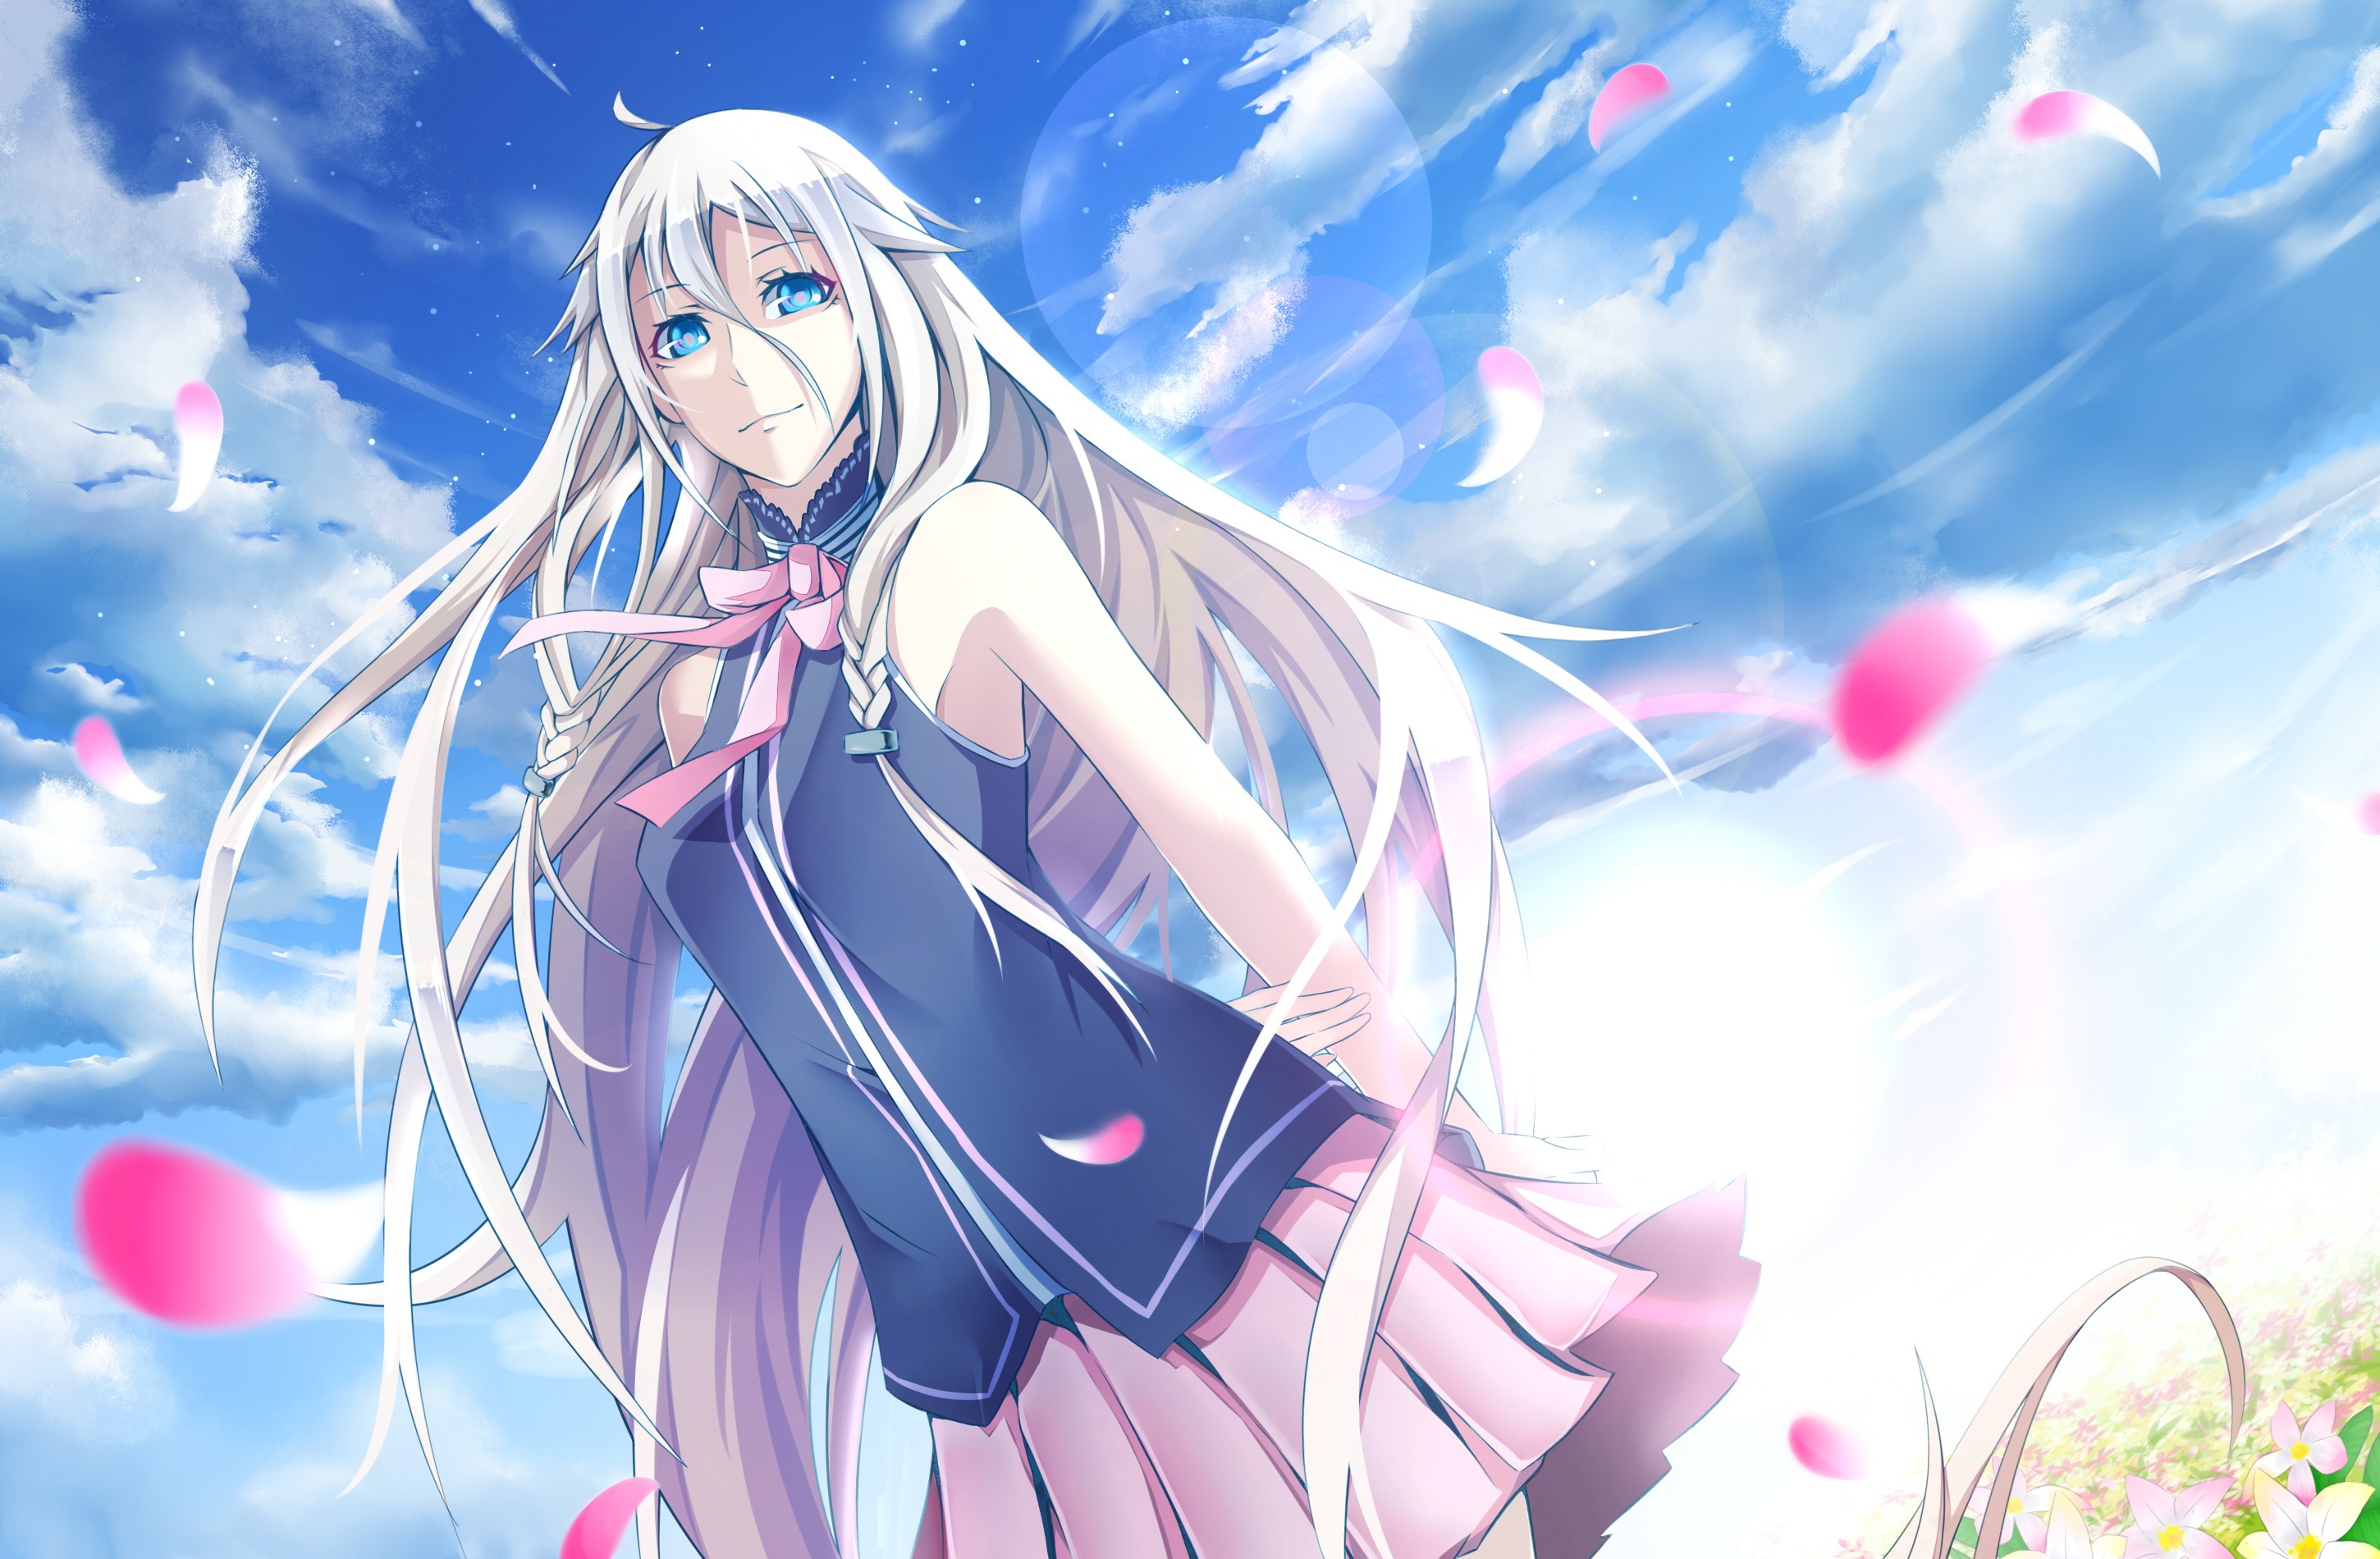 http://img4.wikia.nocookie.net/__cb20131129040859/dragonballzroleplaying/images/c/cc/-Clouds-Vocaloid-Flowers-Blue-Eyes-Skirts-Long-Hair-Smiling-White-Hair-Ahoge-Flower-Petals-Skyscapes-Anime-Girls-Ia-Fresh-New-Hd-Wallpaper--.jpg